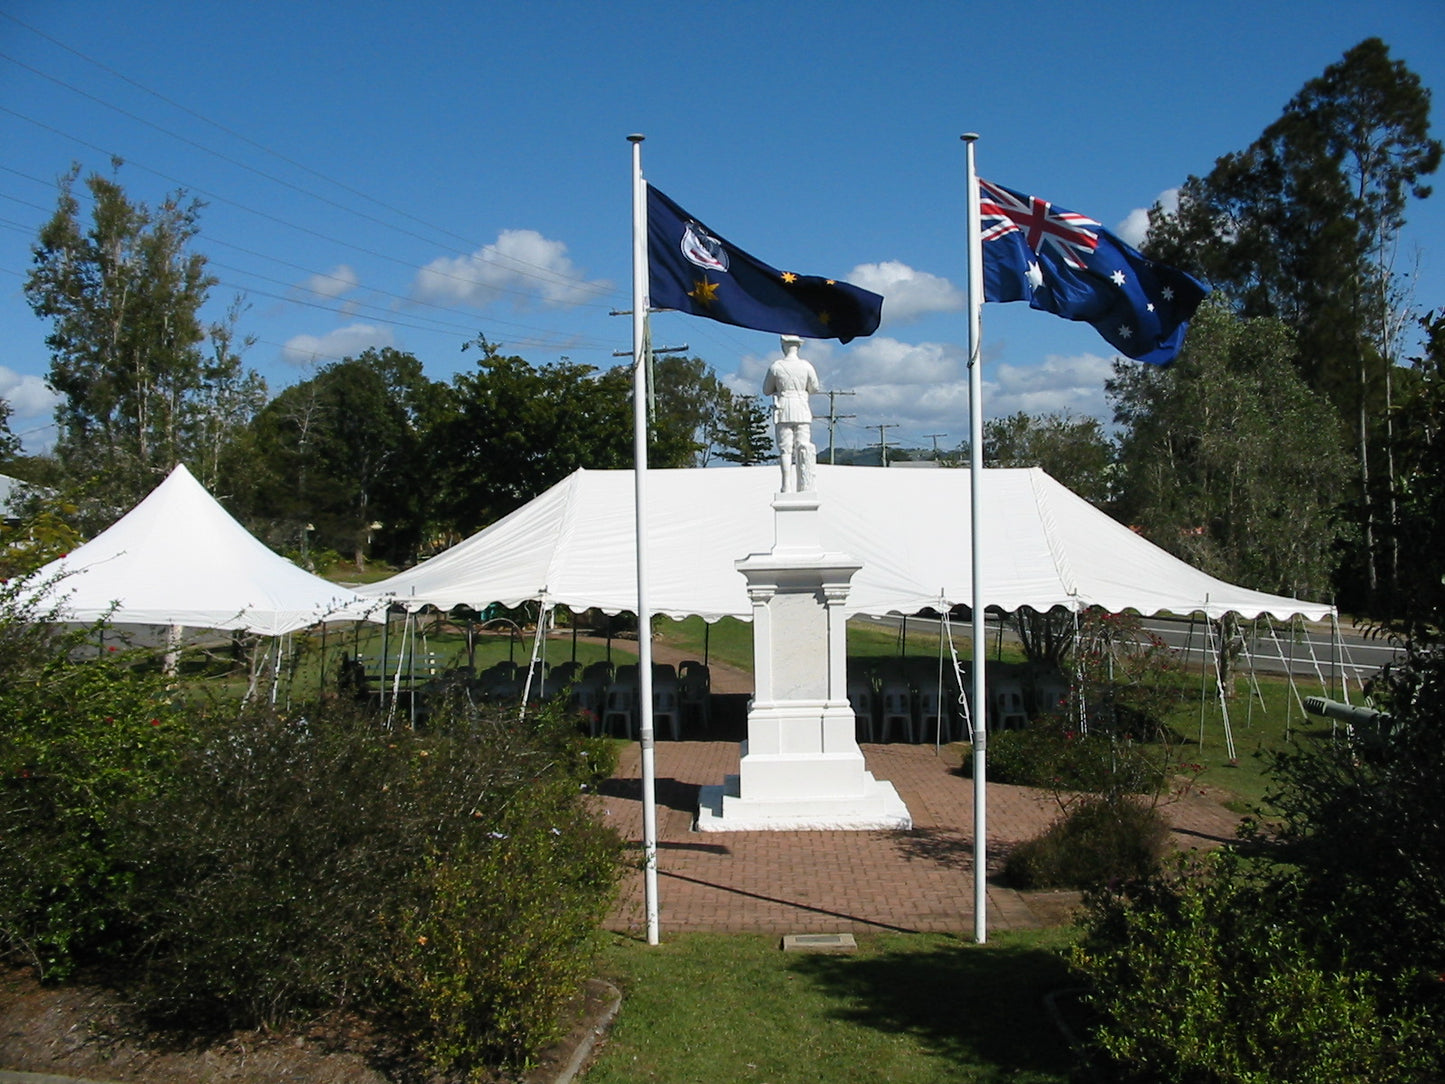 Rope Peg & Pole Marquee - Various Sizes - POA